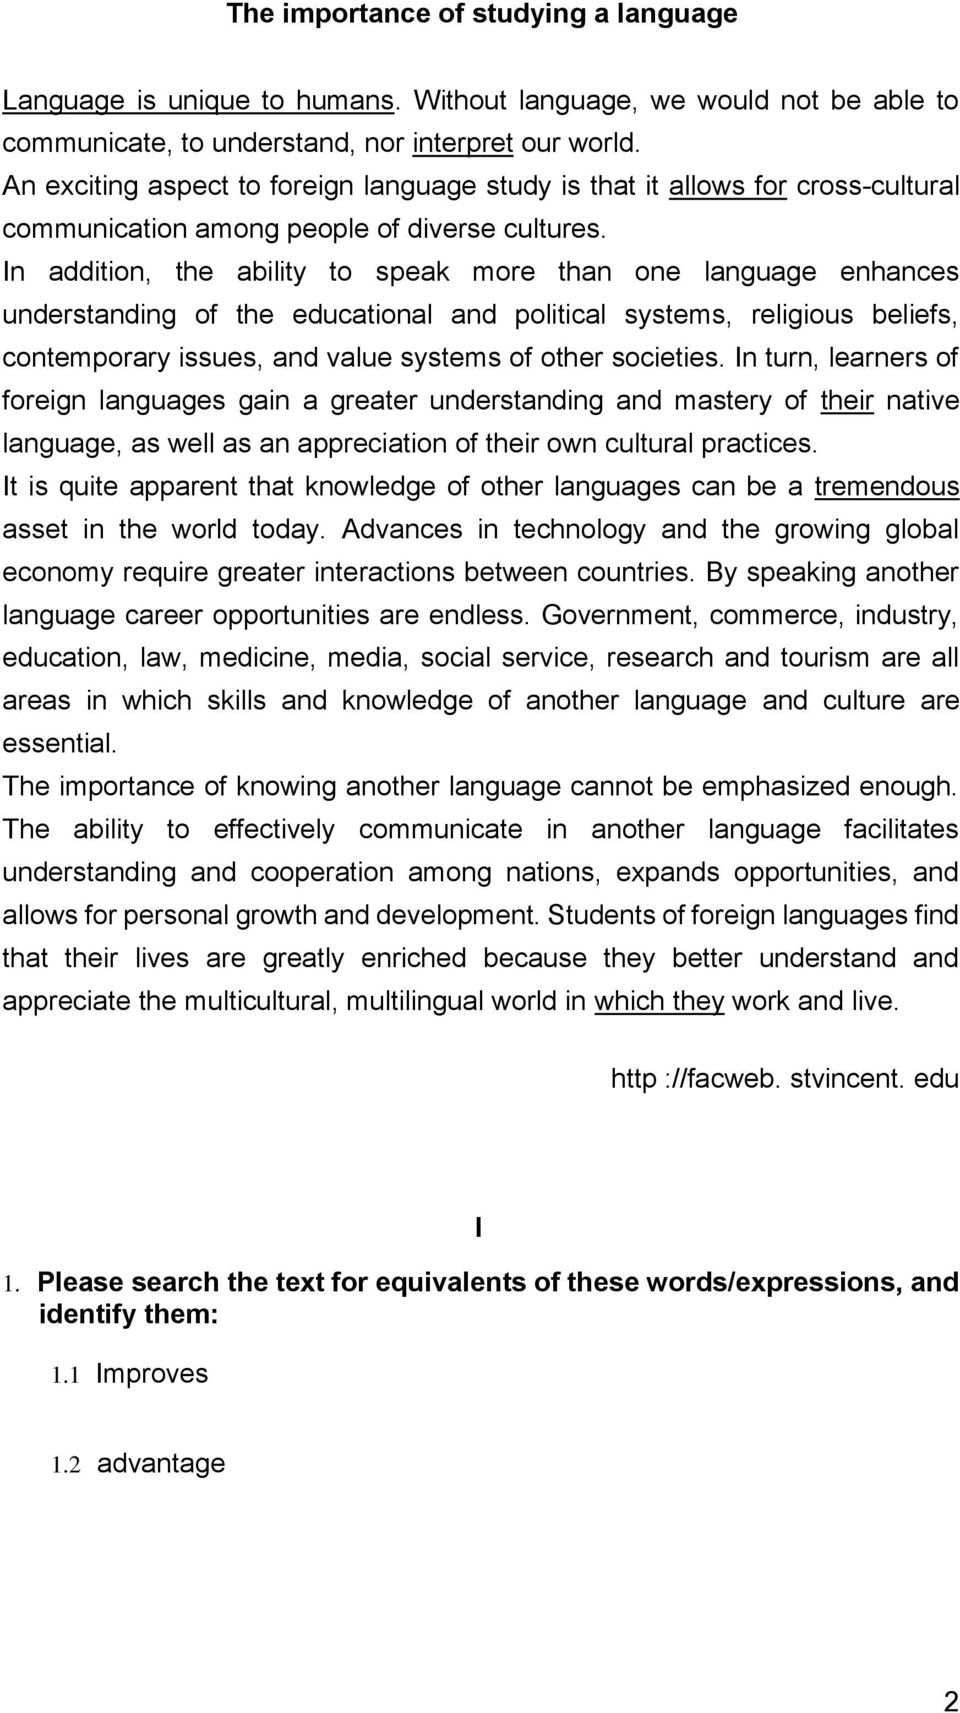 In addition, the ability to speak more than one language enhances understanding of the educational and political systems, religious beliefs, contemporary issues, and value systems of other societies.